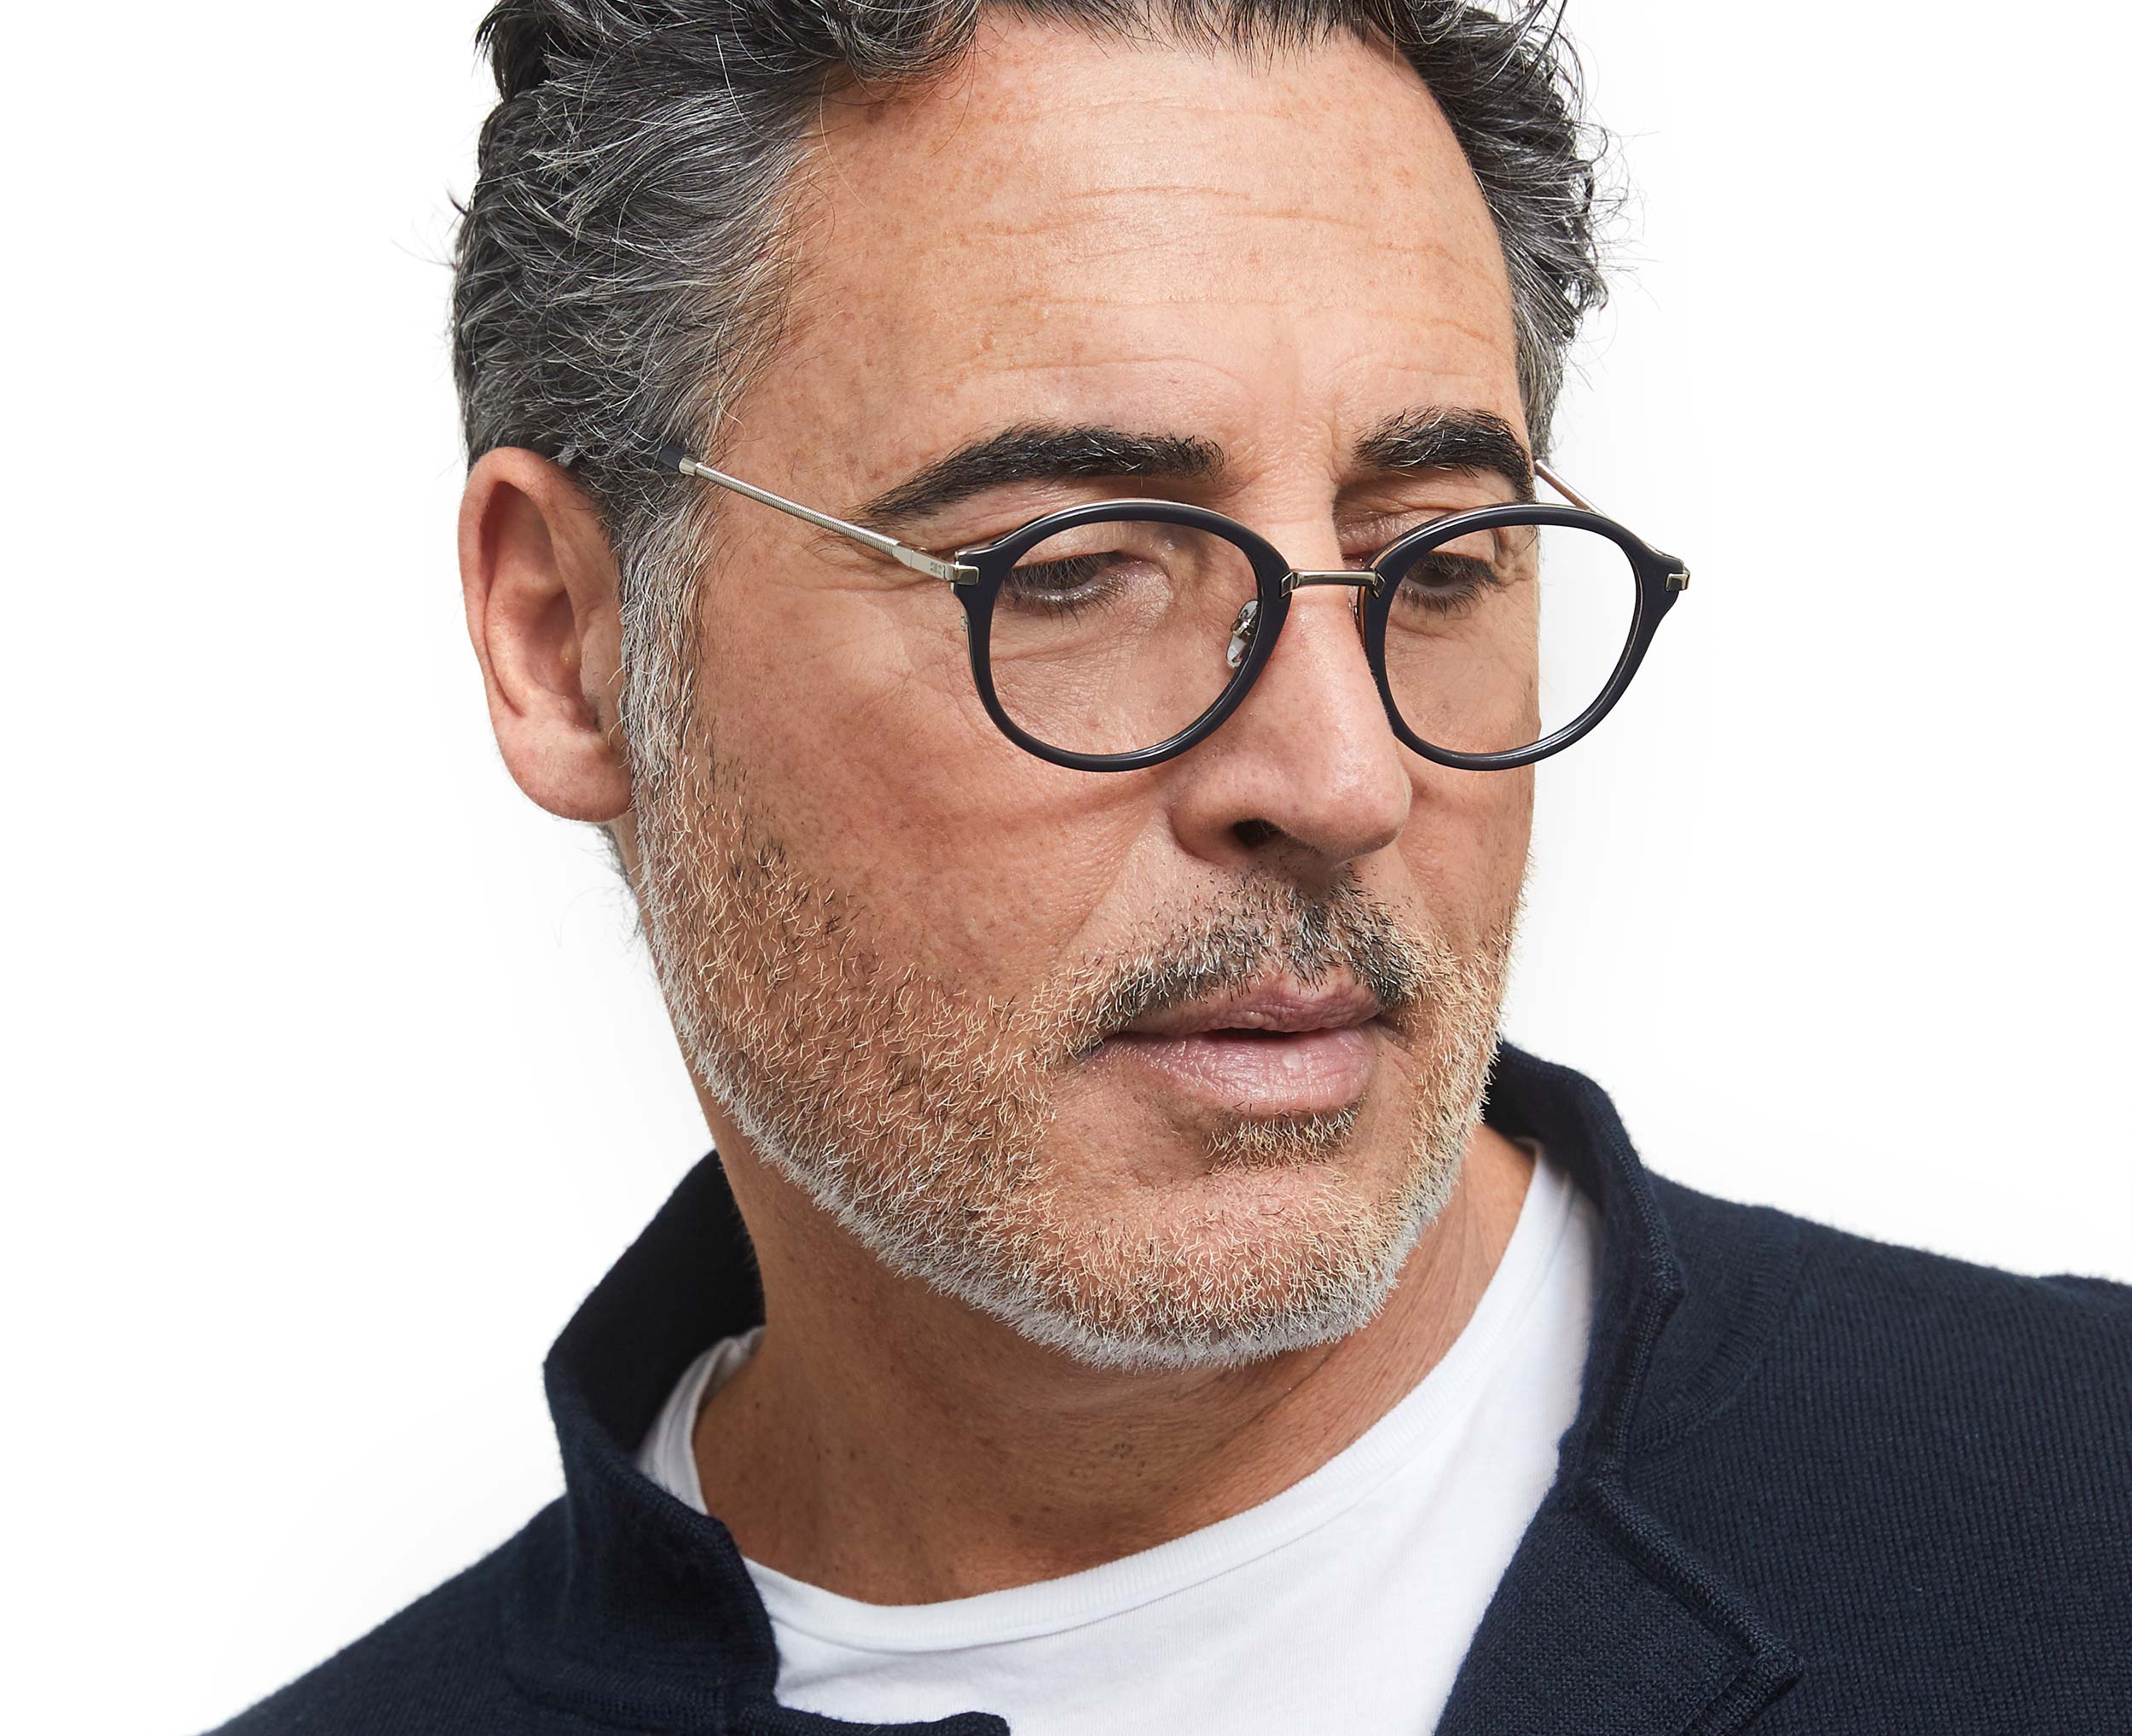 Photo of a man or woman wearing Morgan Dark Grey & Silver Reading Glasses by French Kiwis